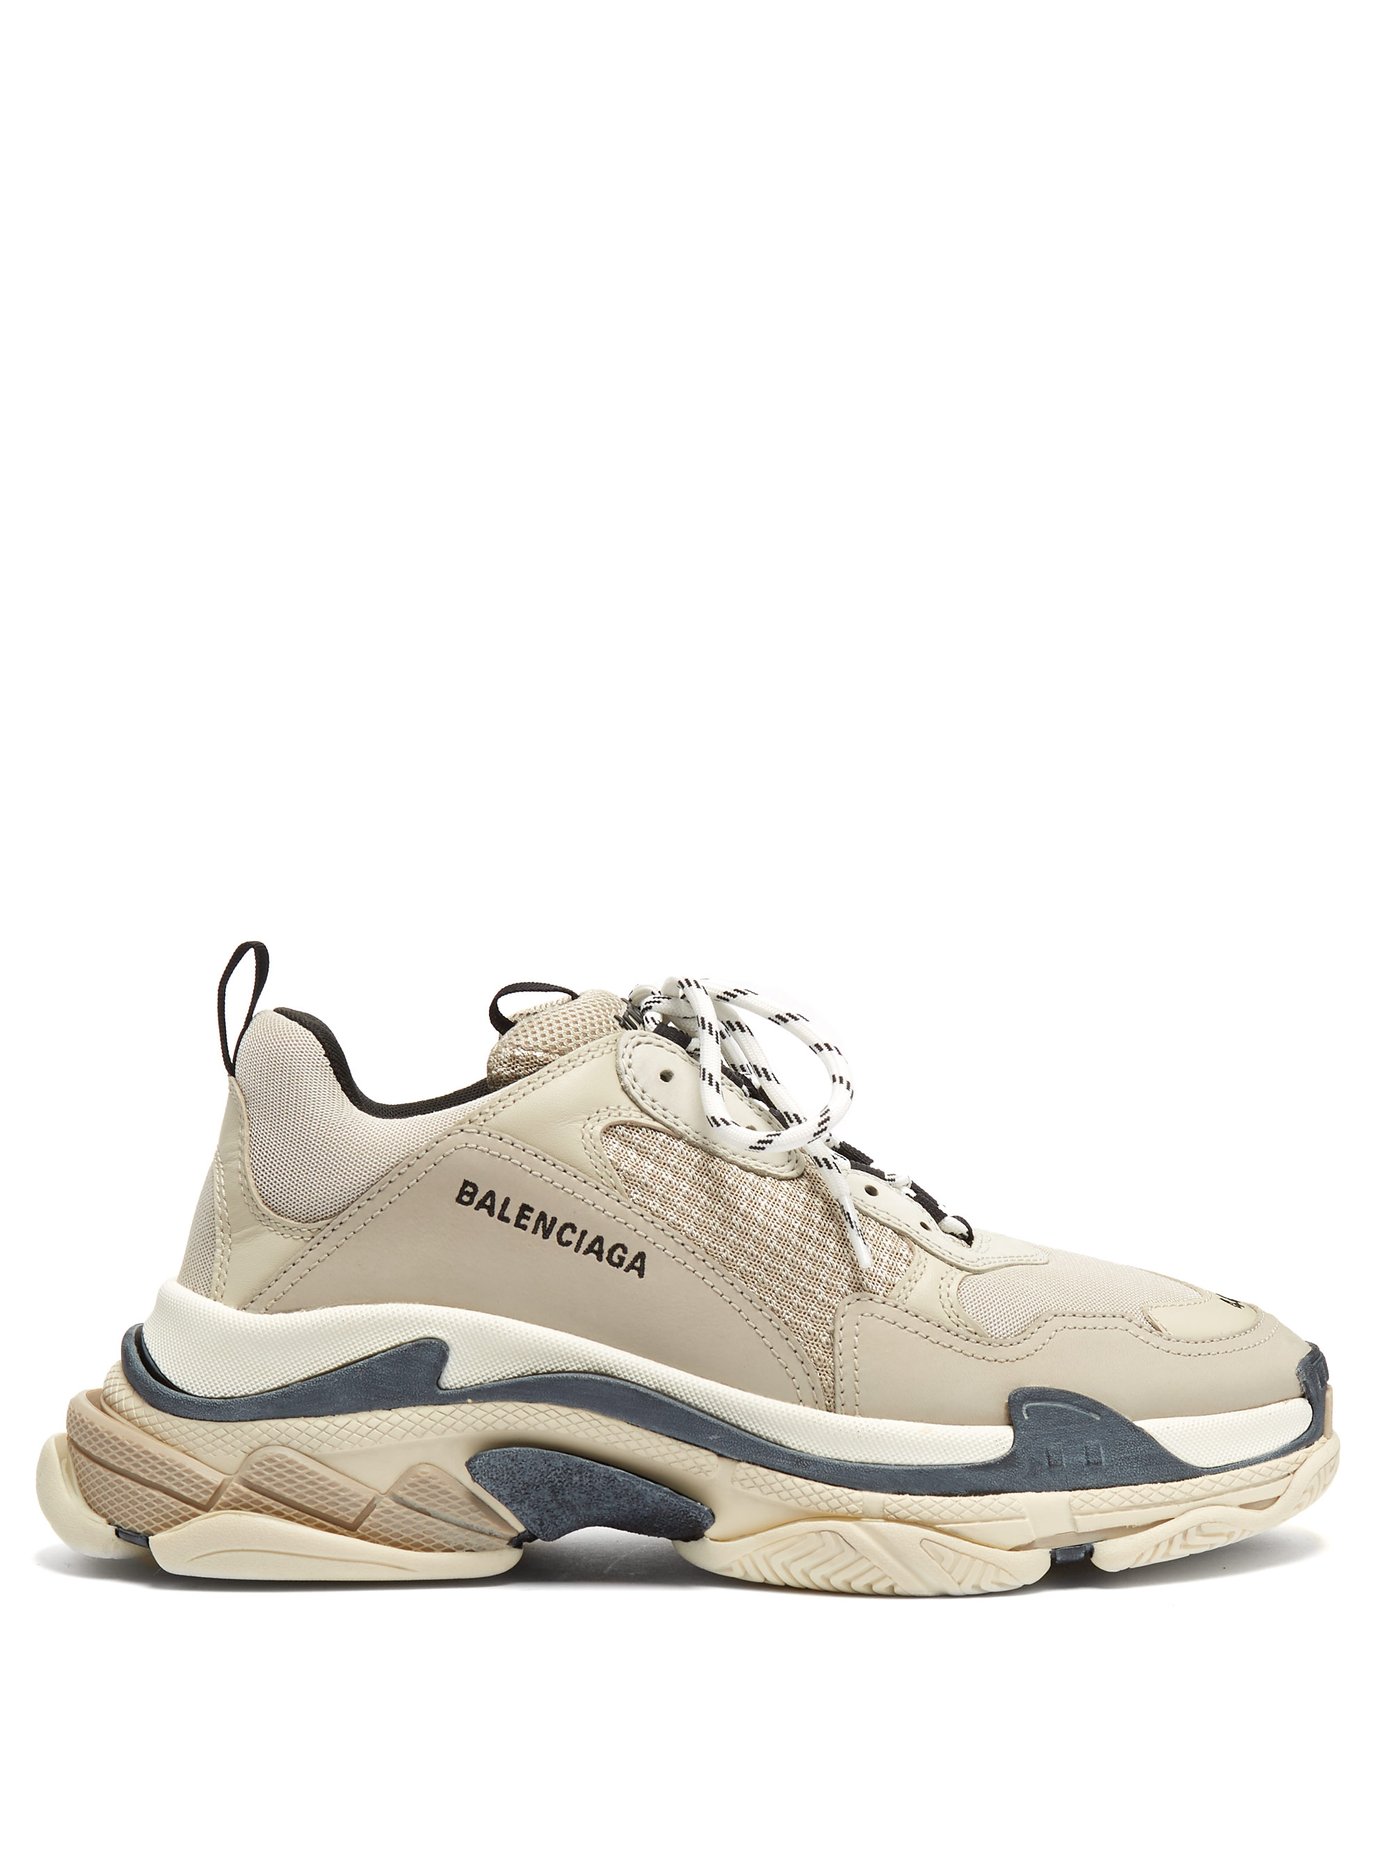 Balenciaga Triple S Mesh Leather Trainer Sneaker Shoes Of